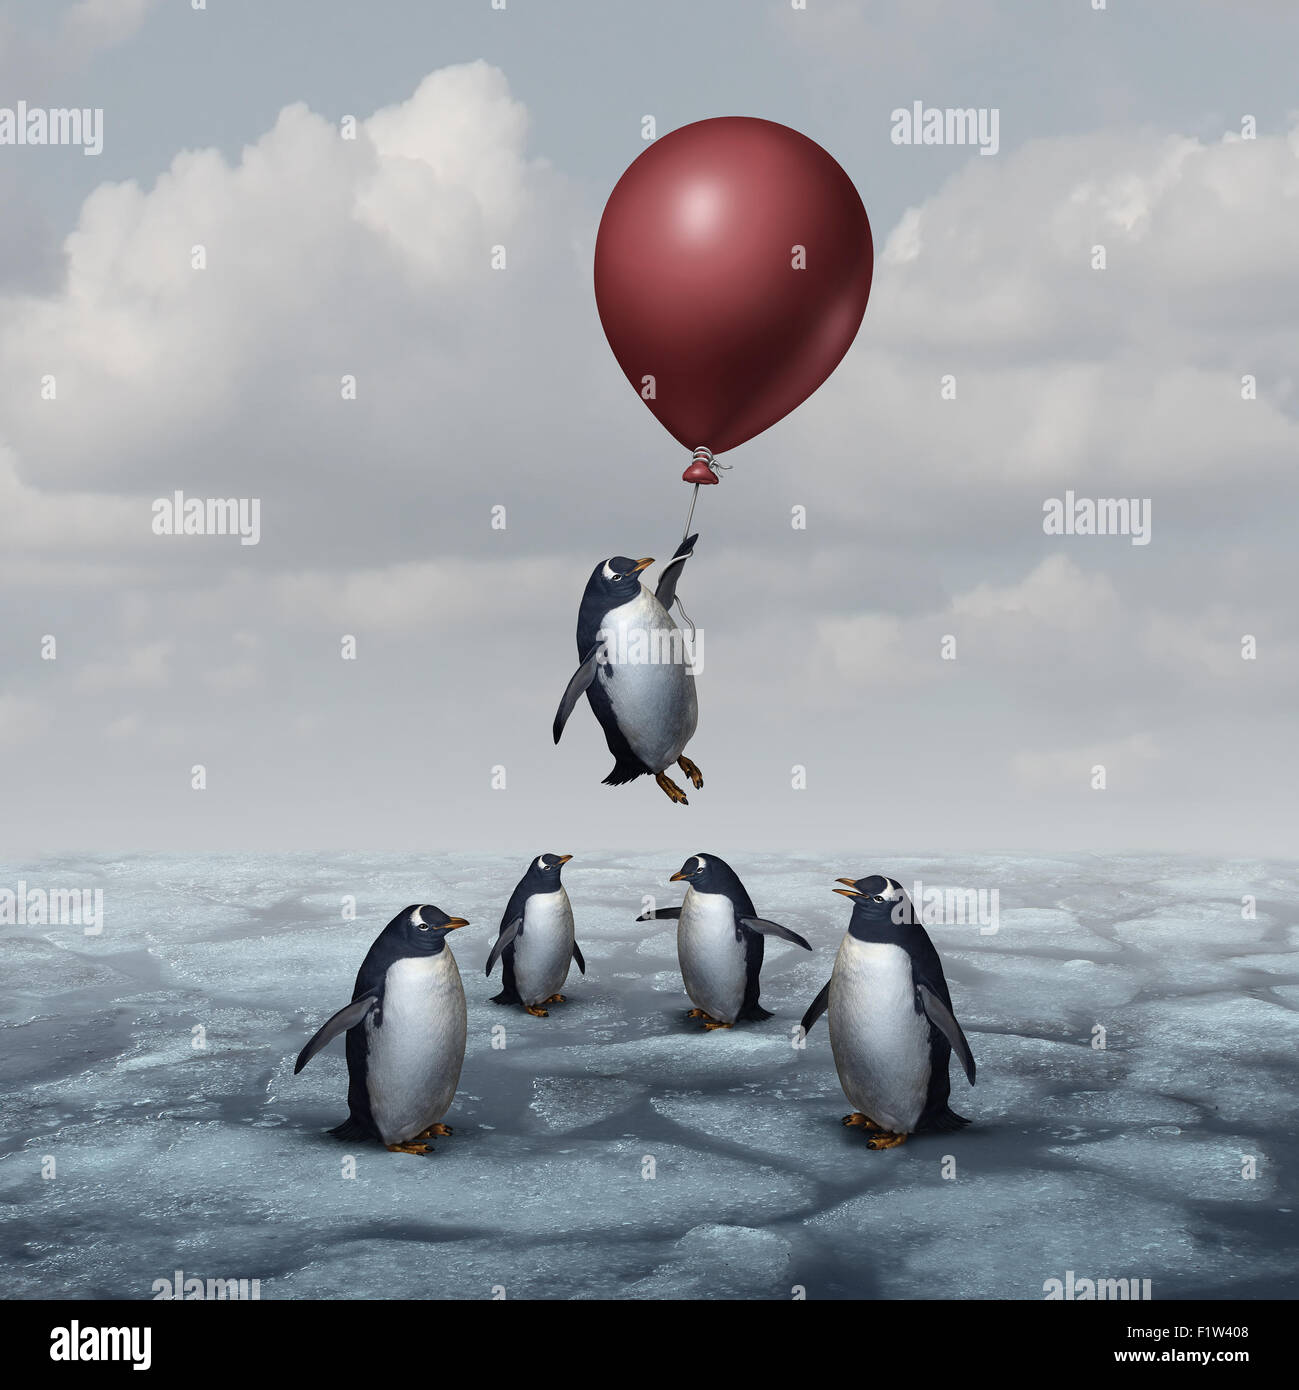 Advantage business concept and leadership innovation metaphor as a group of penguins standing on ice with one individual rising Stock Photo